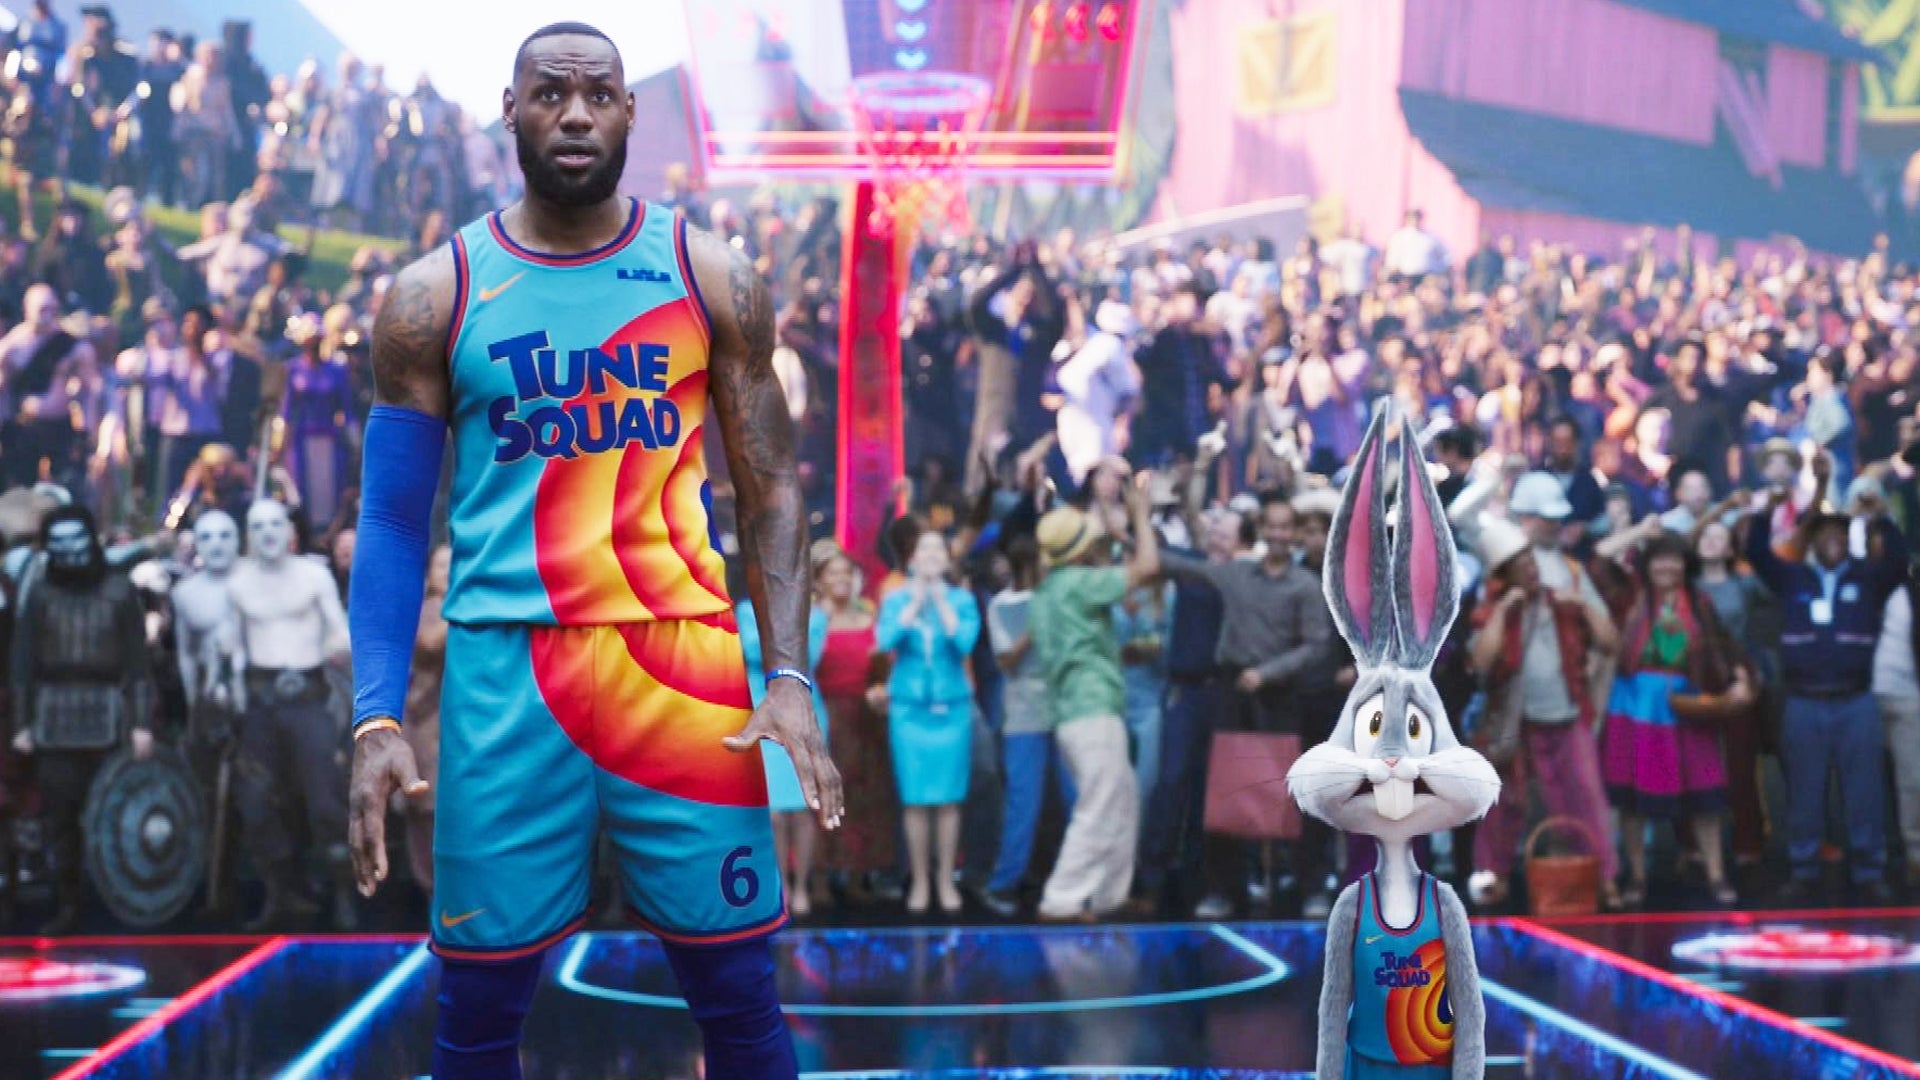 Space Jam 2': LeBron James Debuts New Tune Squad Jersey